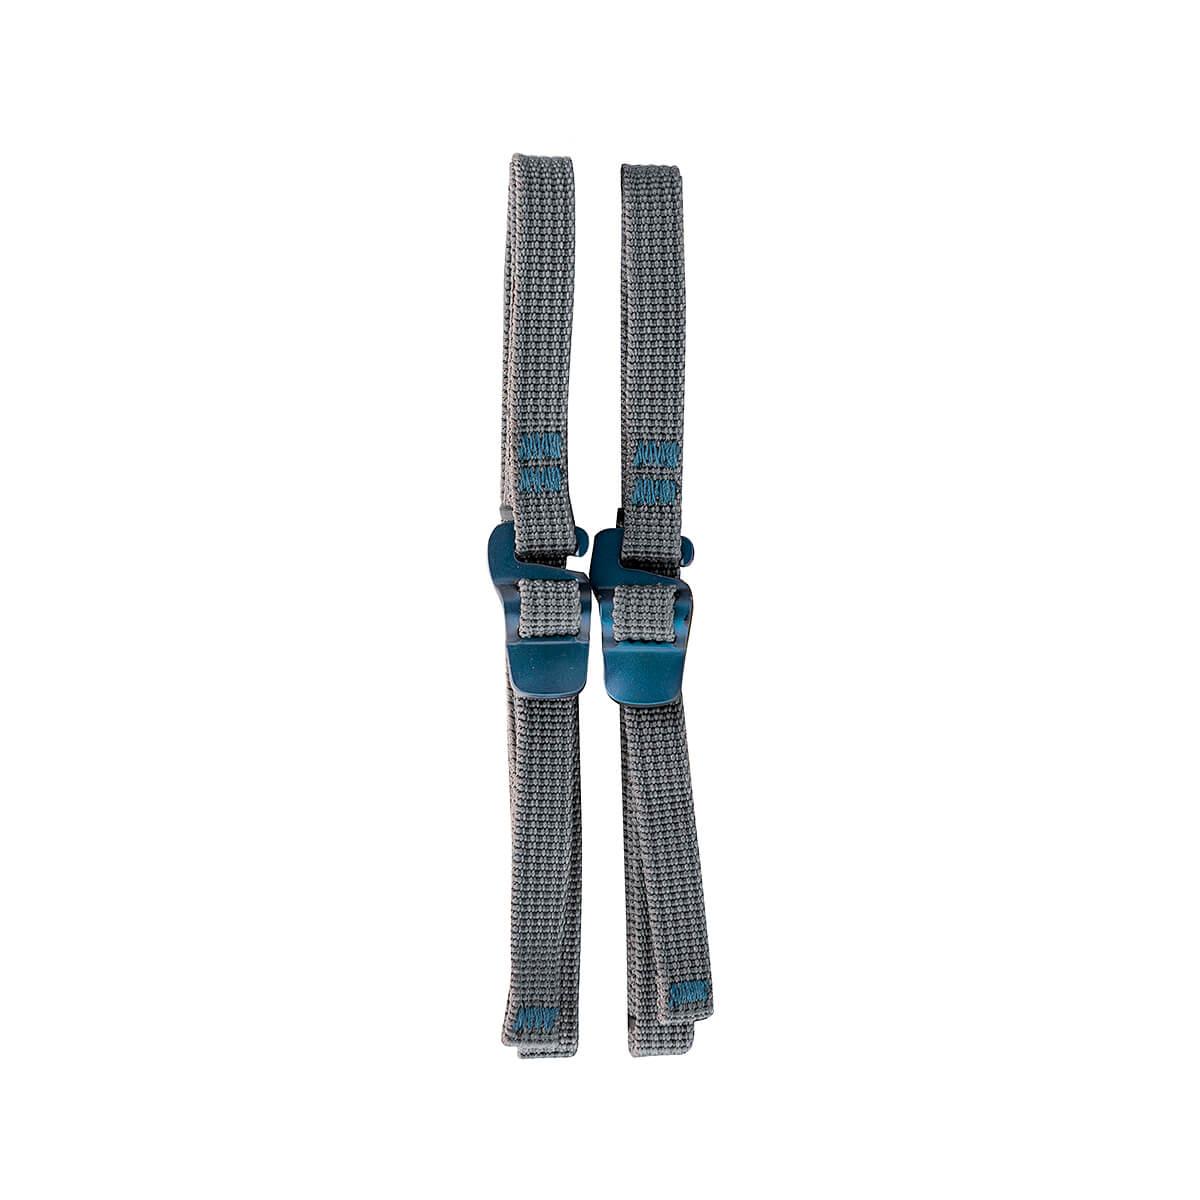  Accessory Straps With Hook Release - 10mm/60 Inch